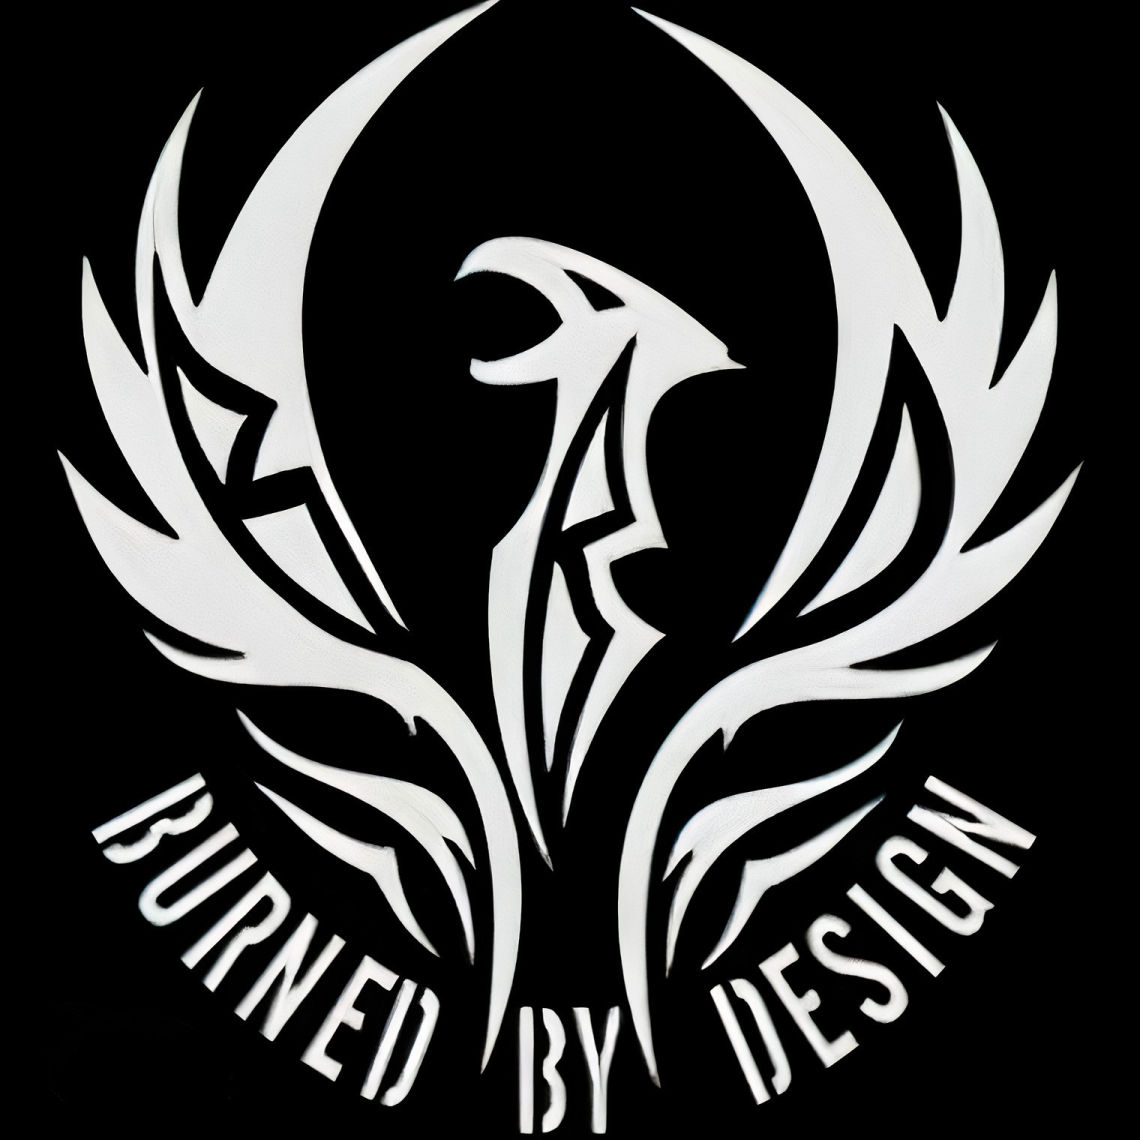 Burned by Design logo showing a phoenix in flames